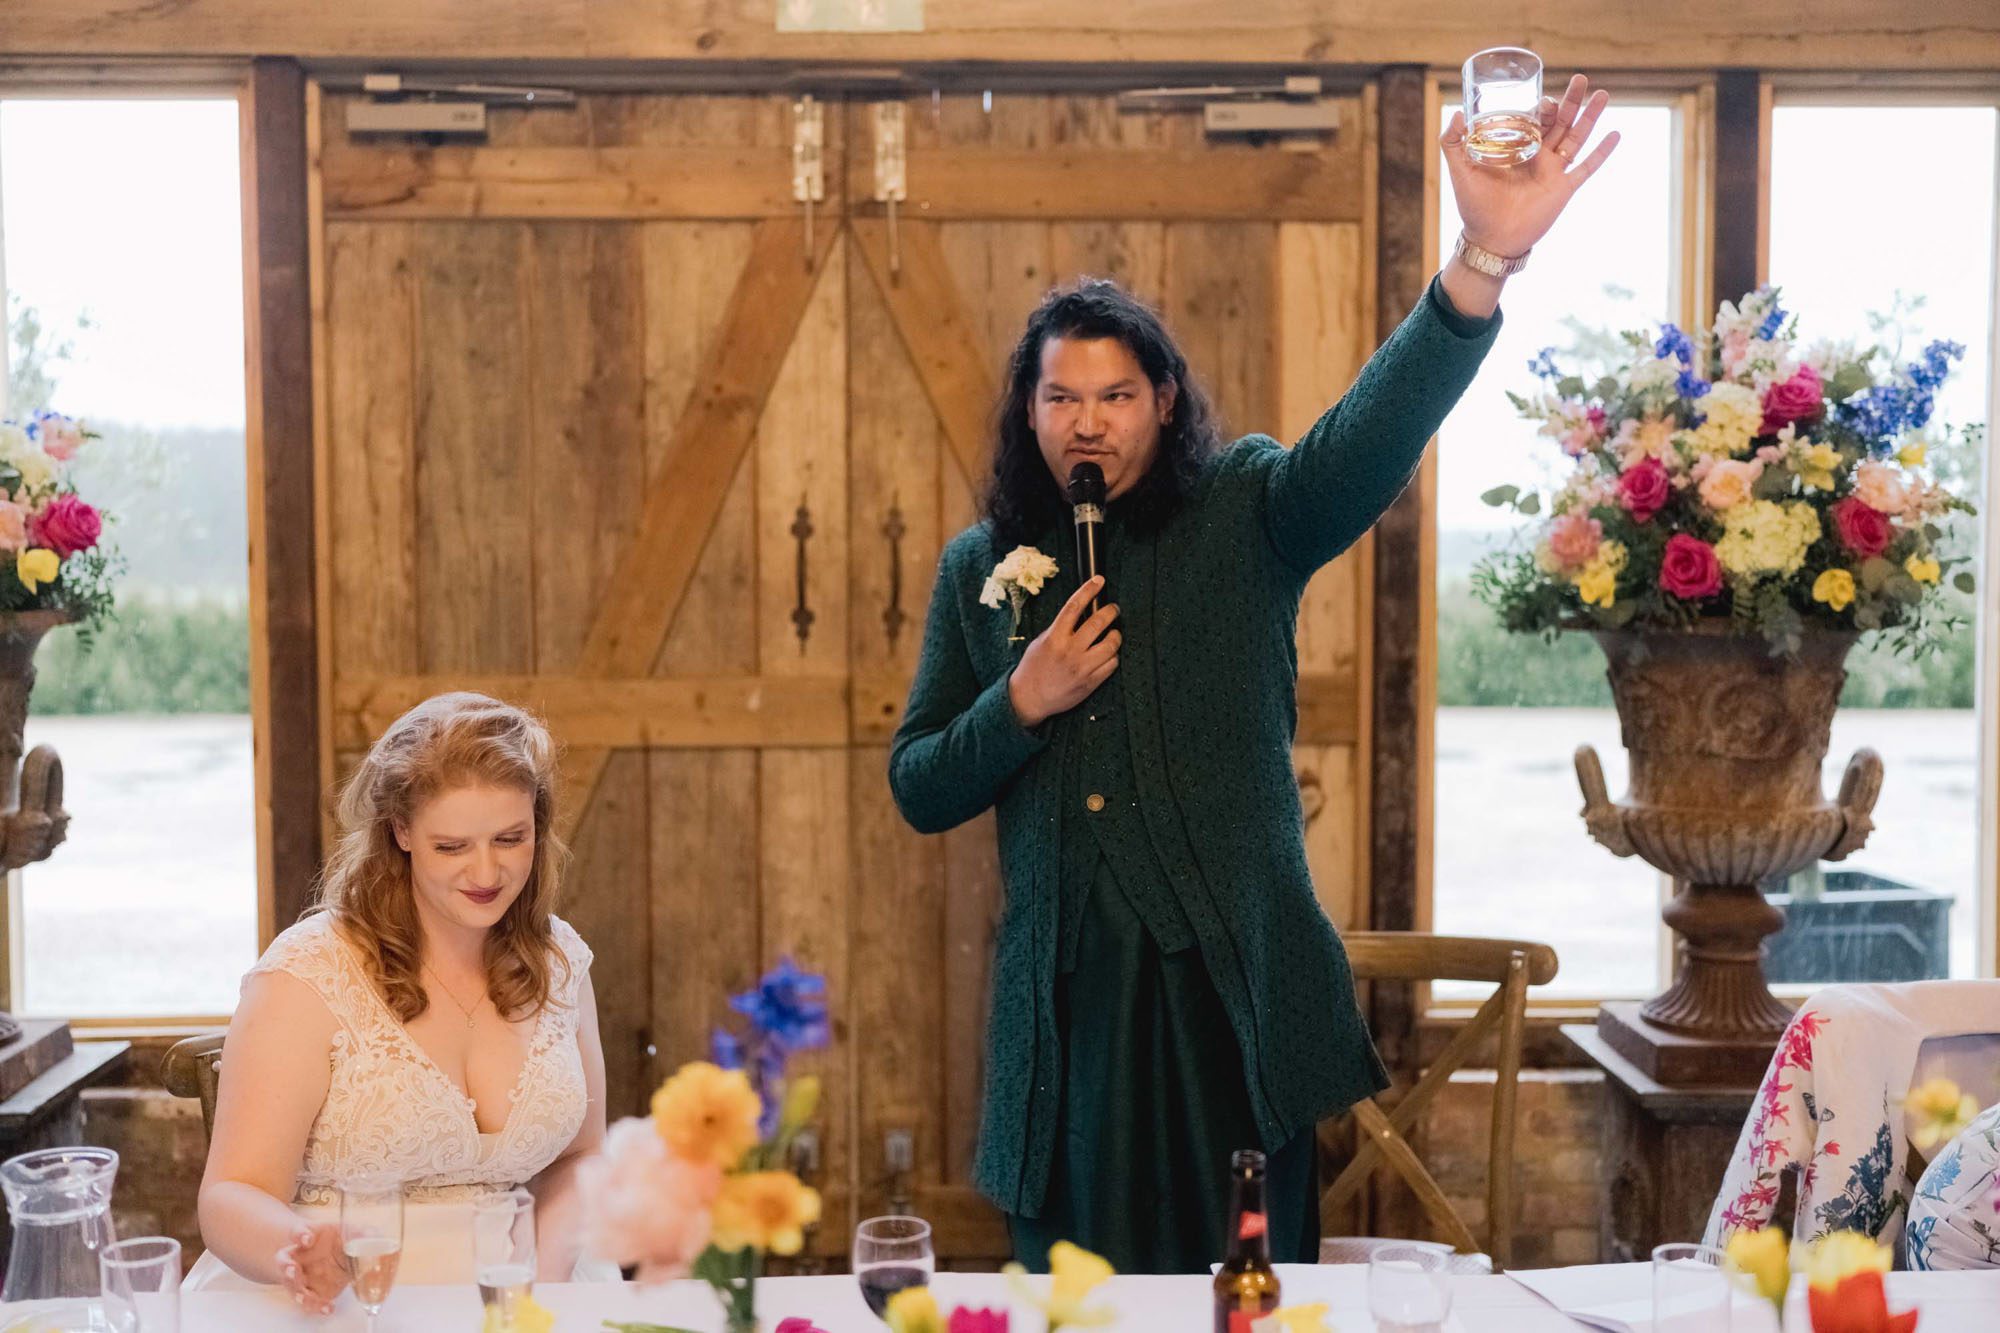 Groom delivers his speech at a wedding.